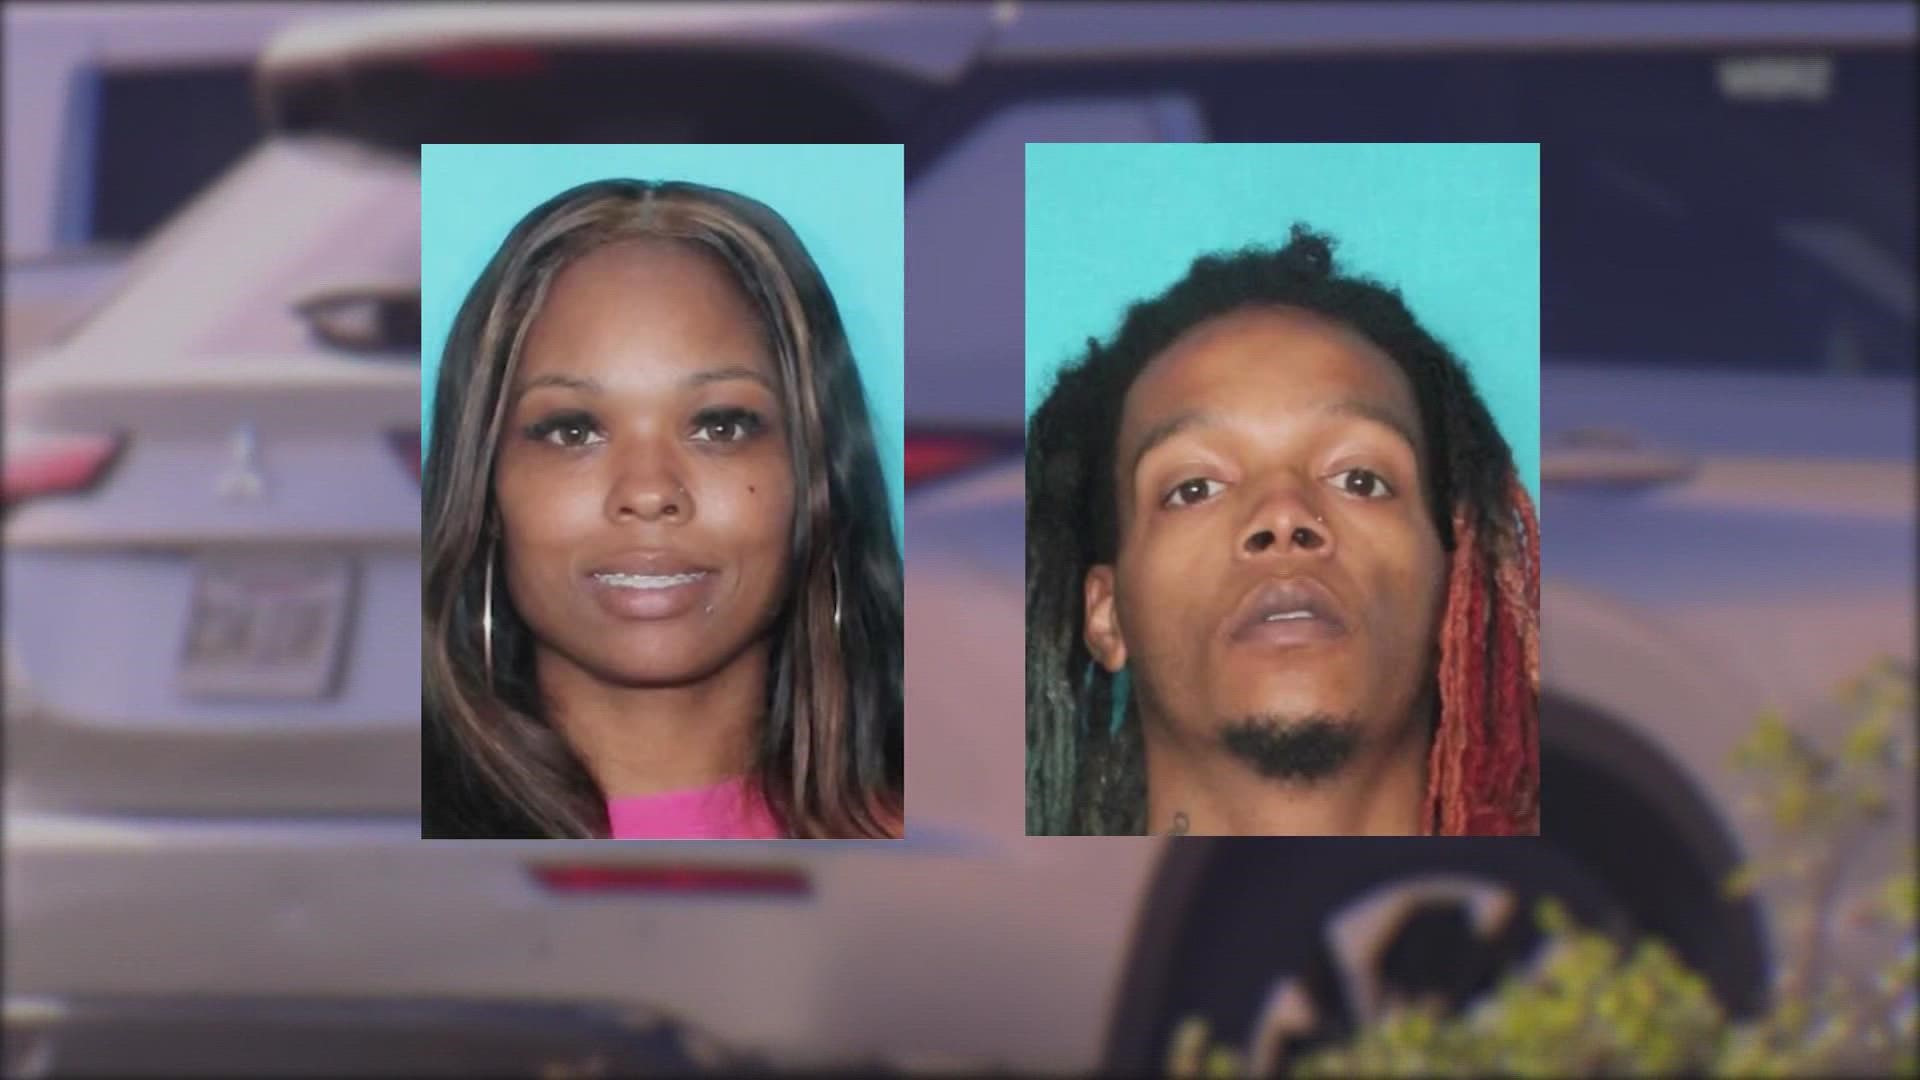 Zaikiya Duncan and Jova Terrell were taken into custody in Louisiana after an AMBER Alert that originated out of the Cypress area.